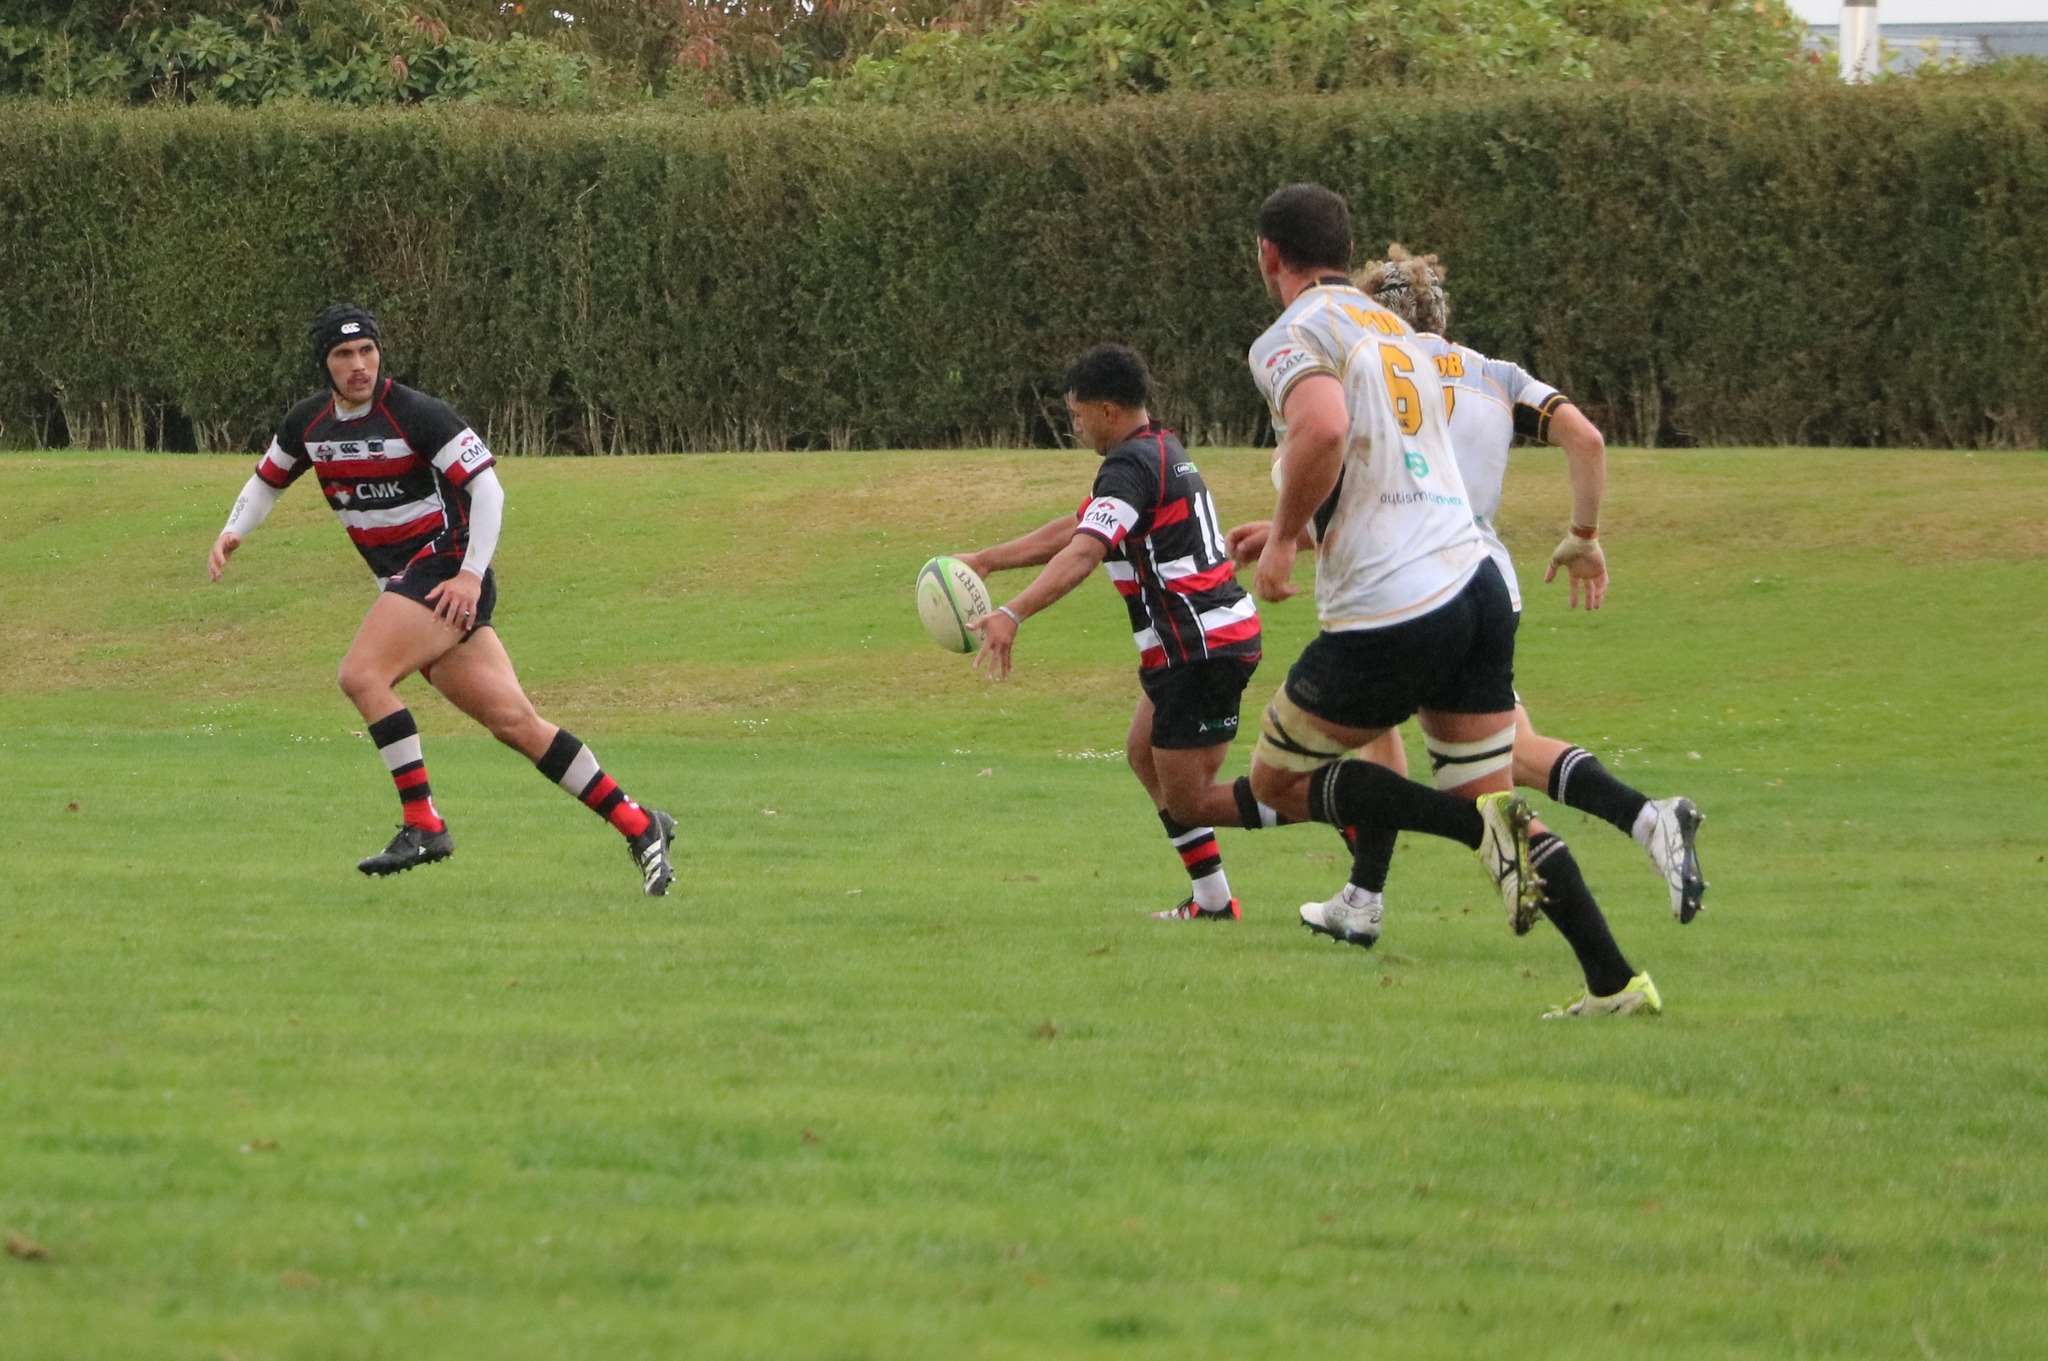 Rugby: Stratford-Eltham to learn from first outing